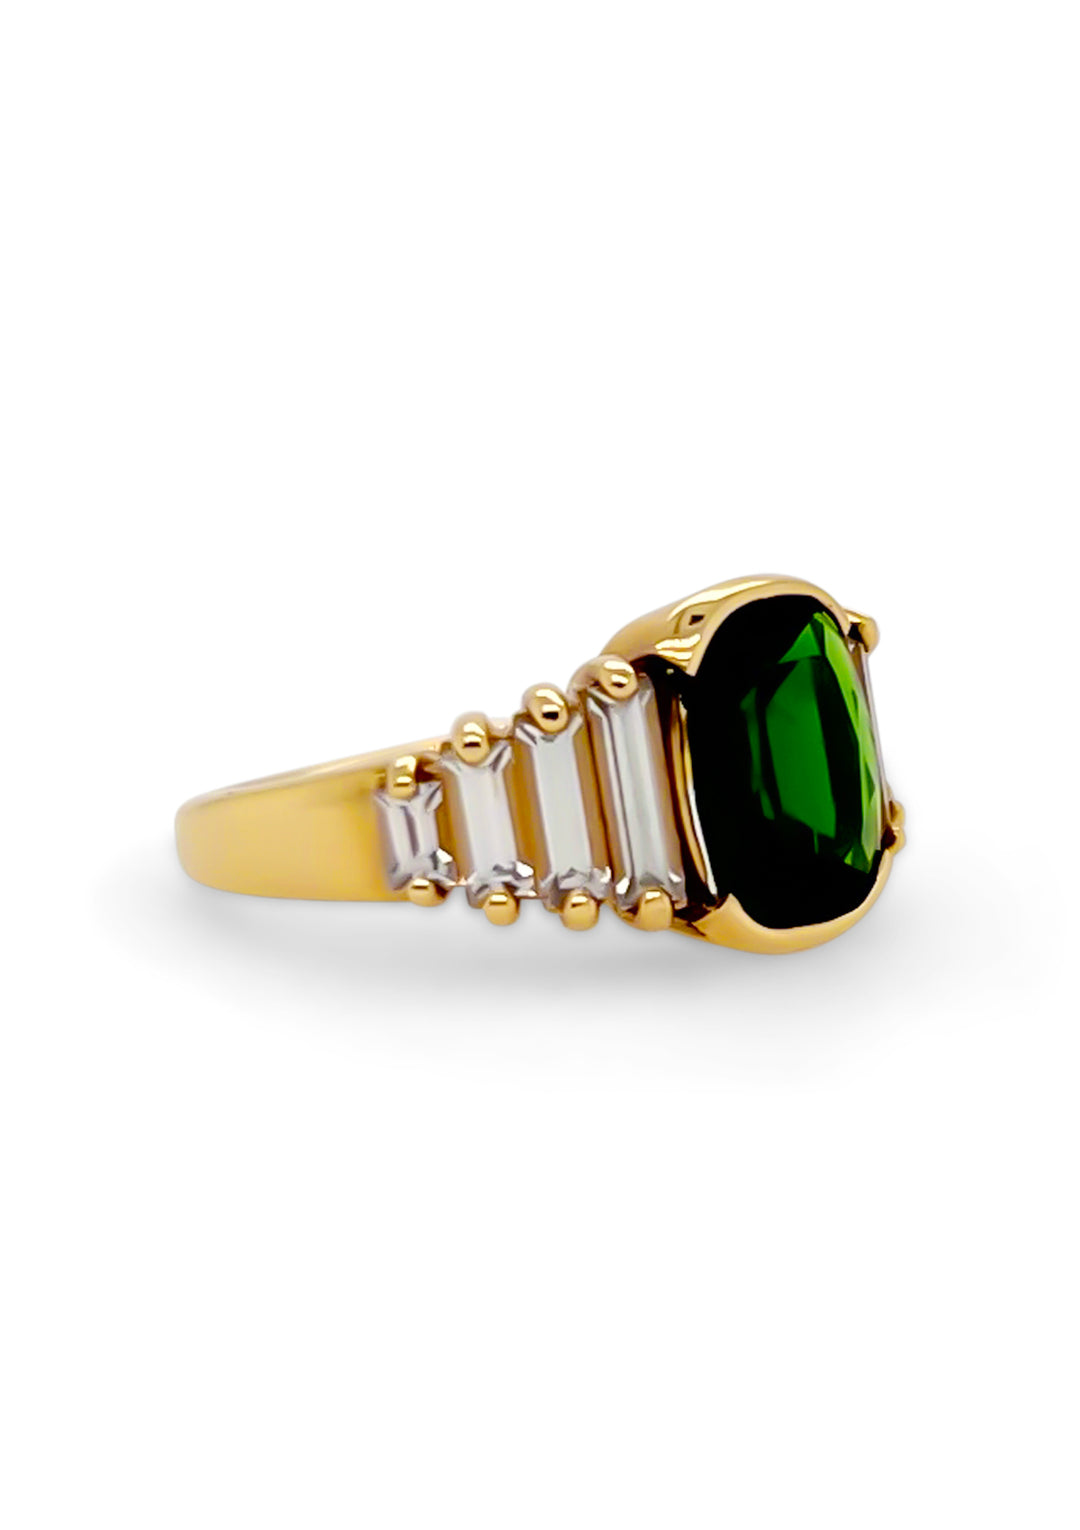 14K Yellow Gold 2.00 Carat Antique Cushion Cut Chrome Diopside And Lab Grown White Sapphire Ring